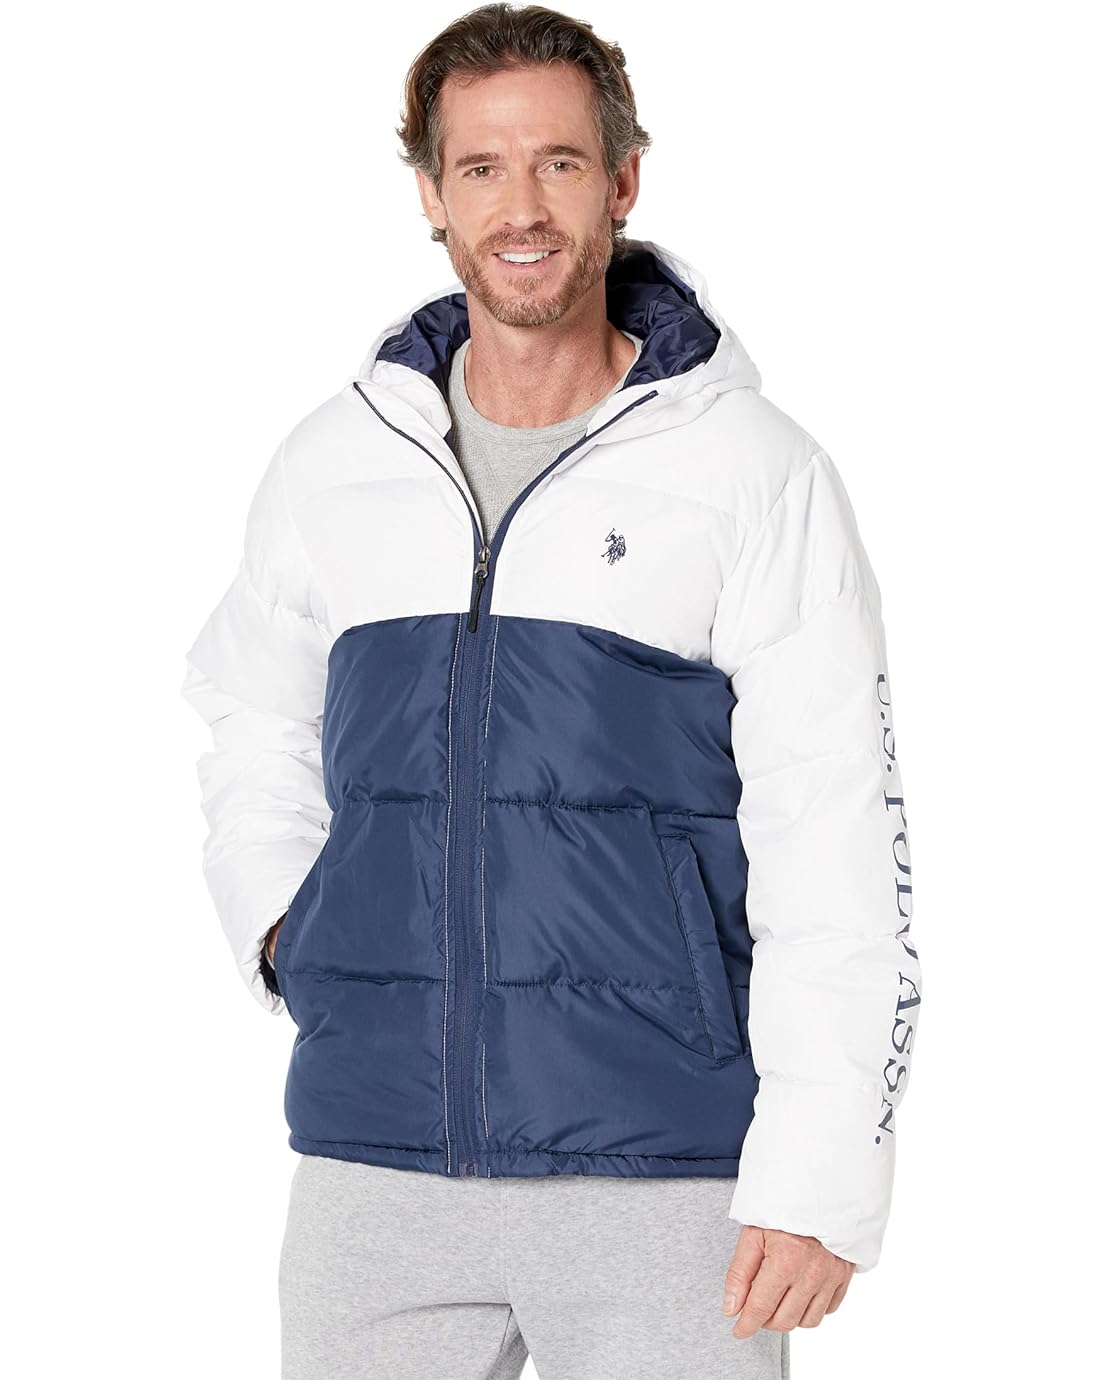 U.S. POLO ASSN. Color-Blocked Padded Puffer